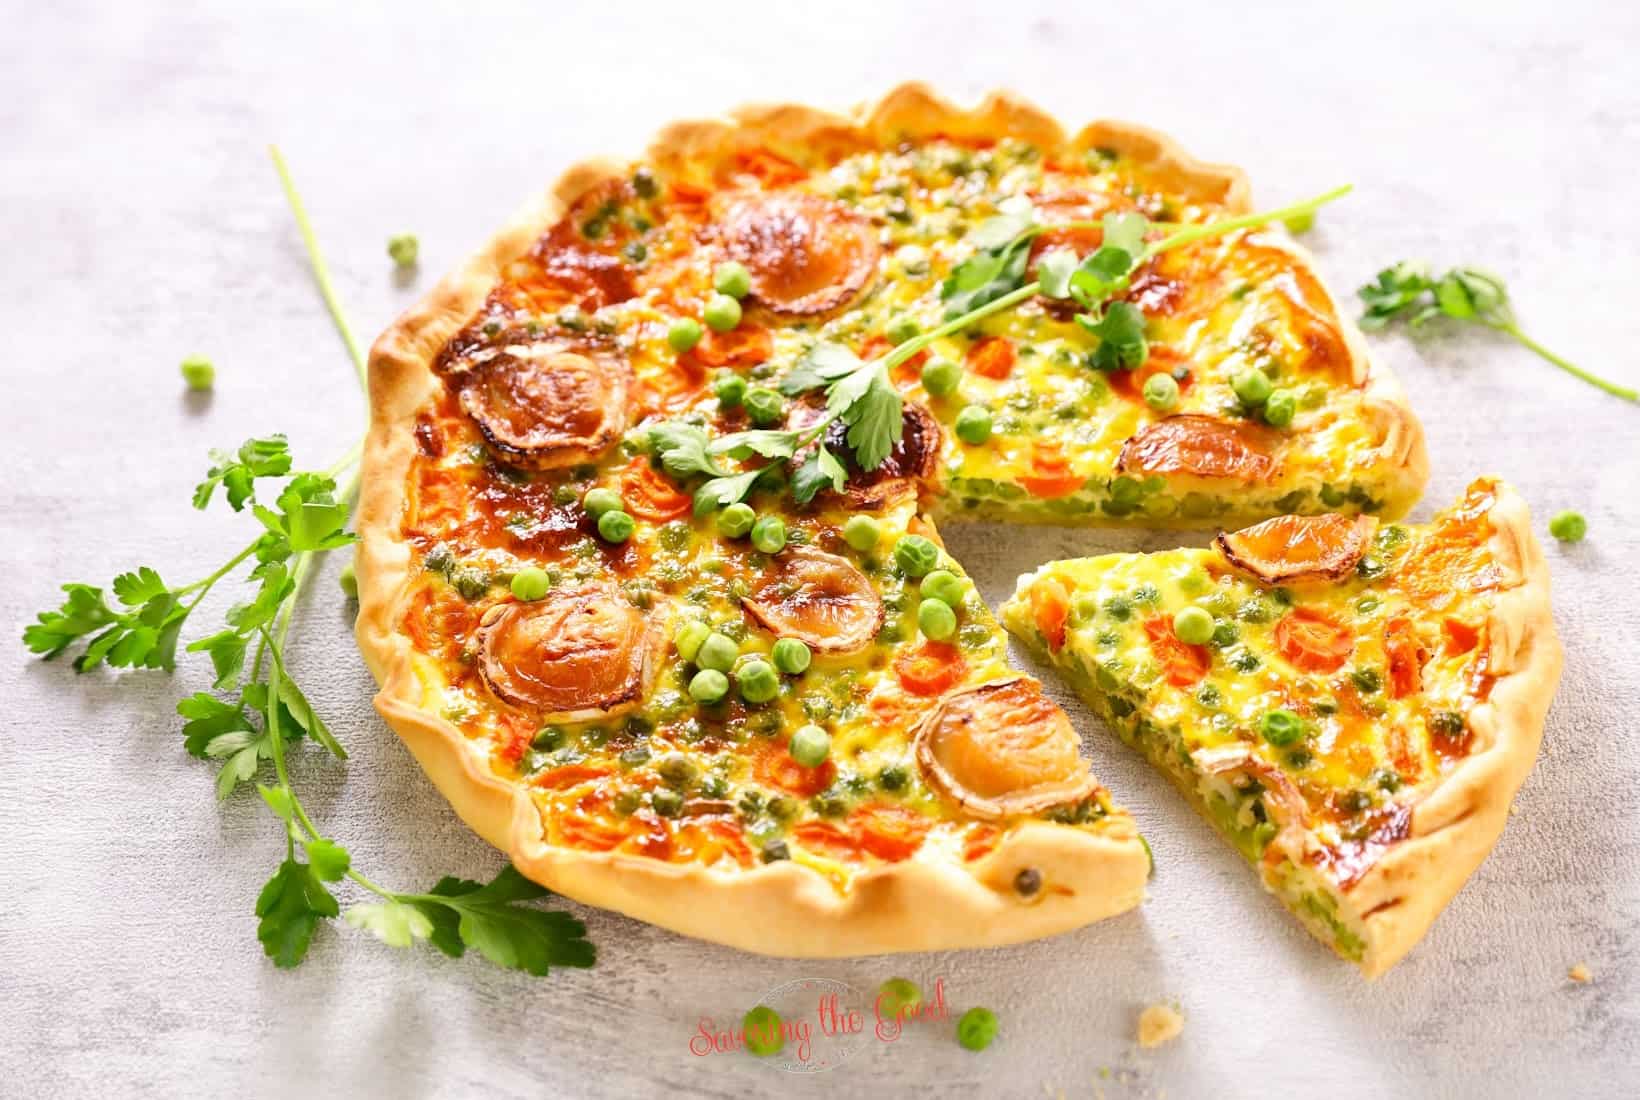 A quiche with peas and carrots on a white background.